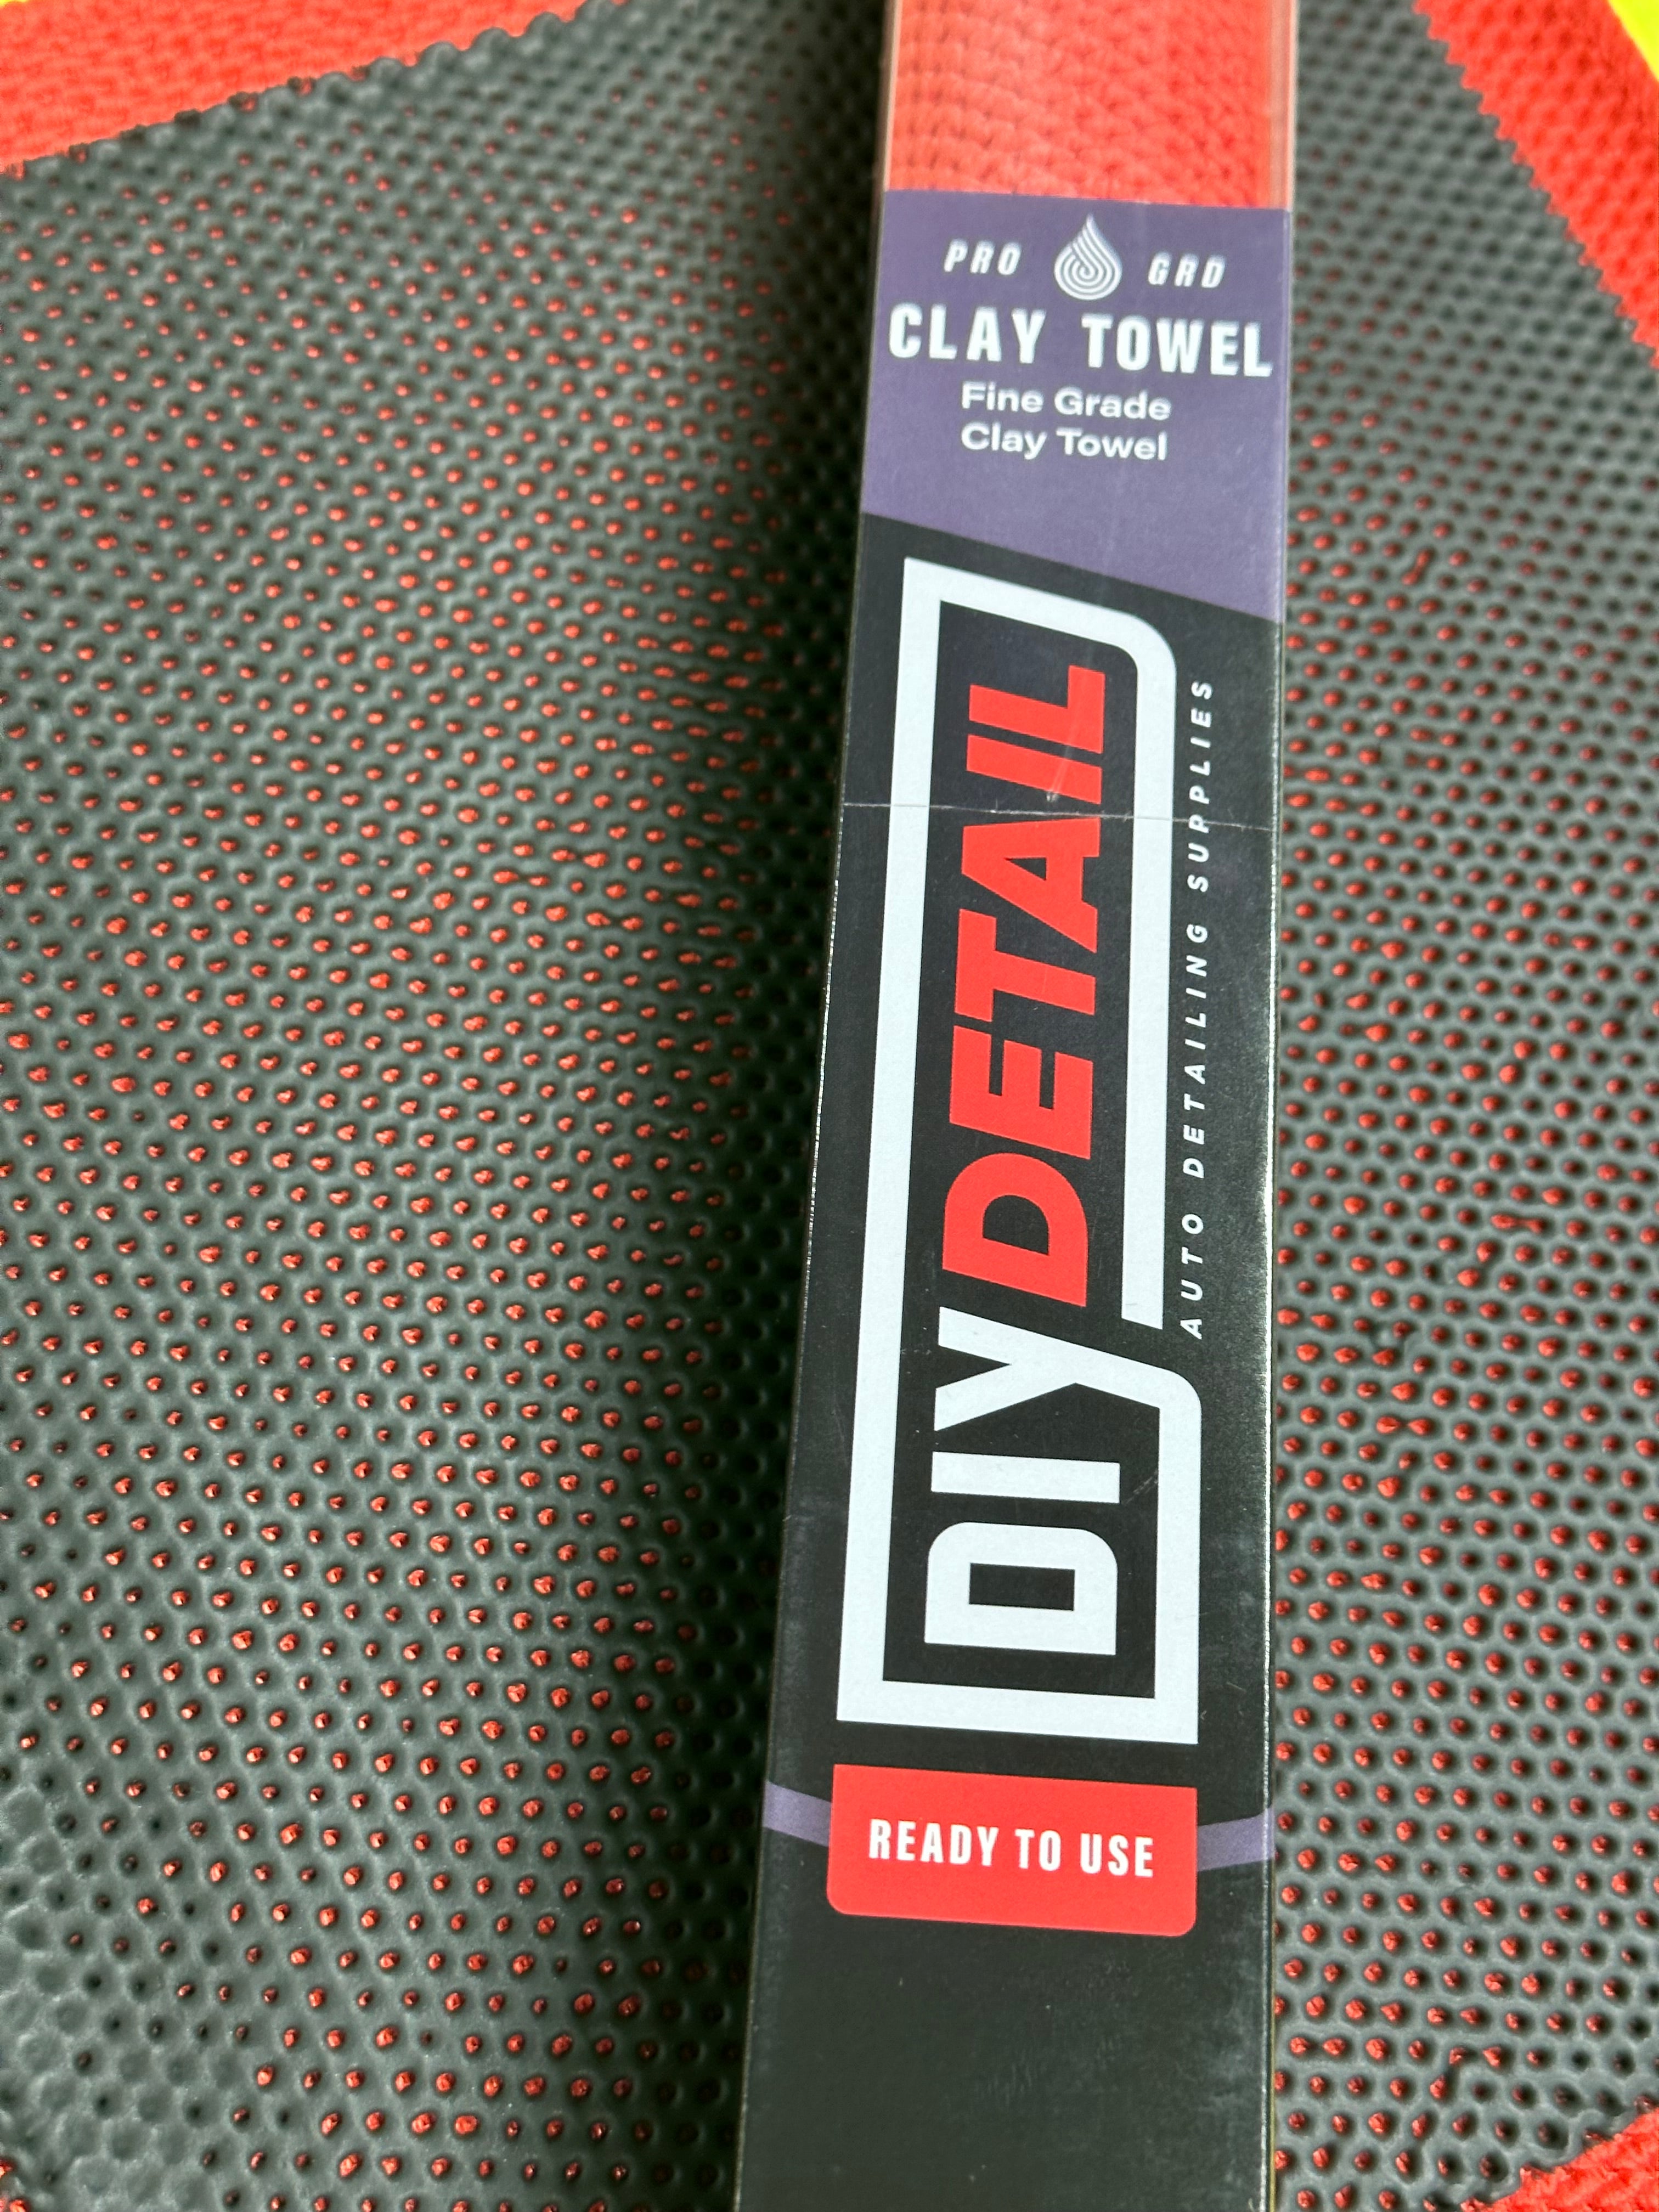 How to dry & store your clay towel! #detailing #detailer #diydetail #y, Detailing